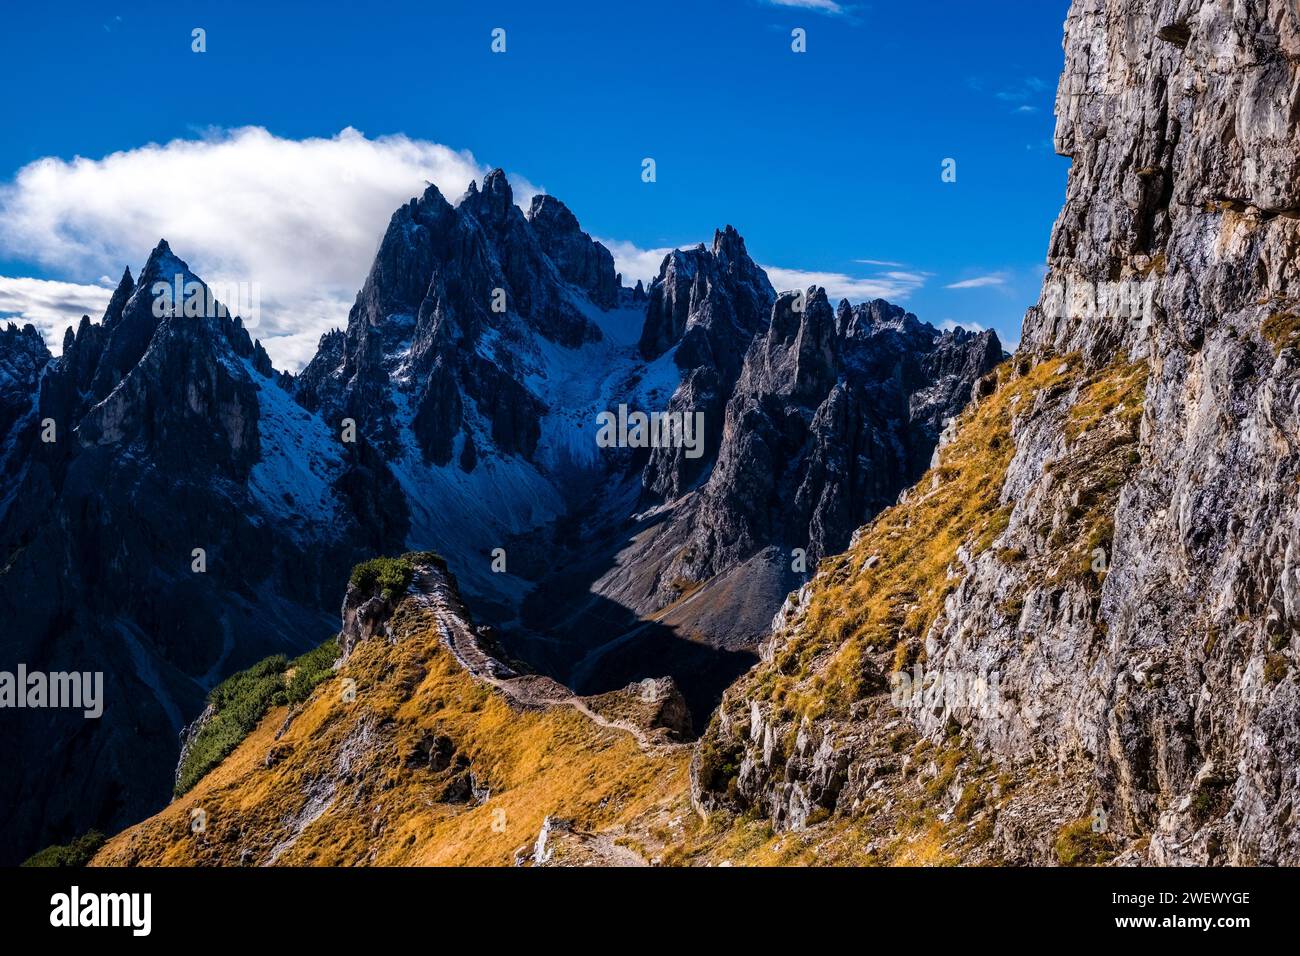 The rocky summits of the rock formation Cadini di Misurina in Tre Cime National Park, partially covered in fresh snow in autumn. Stock Photo